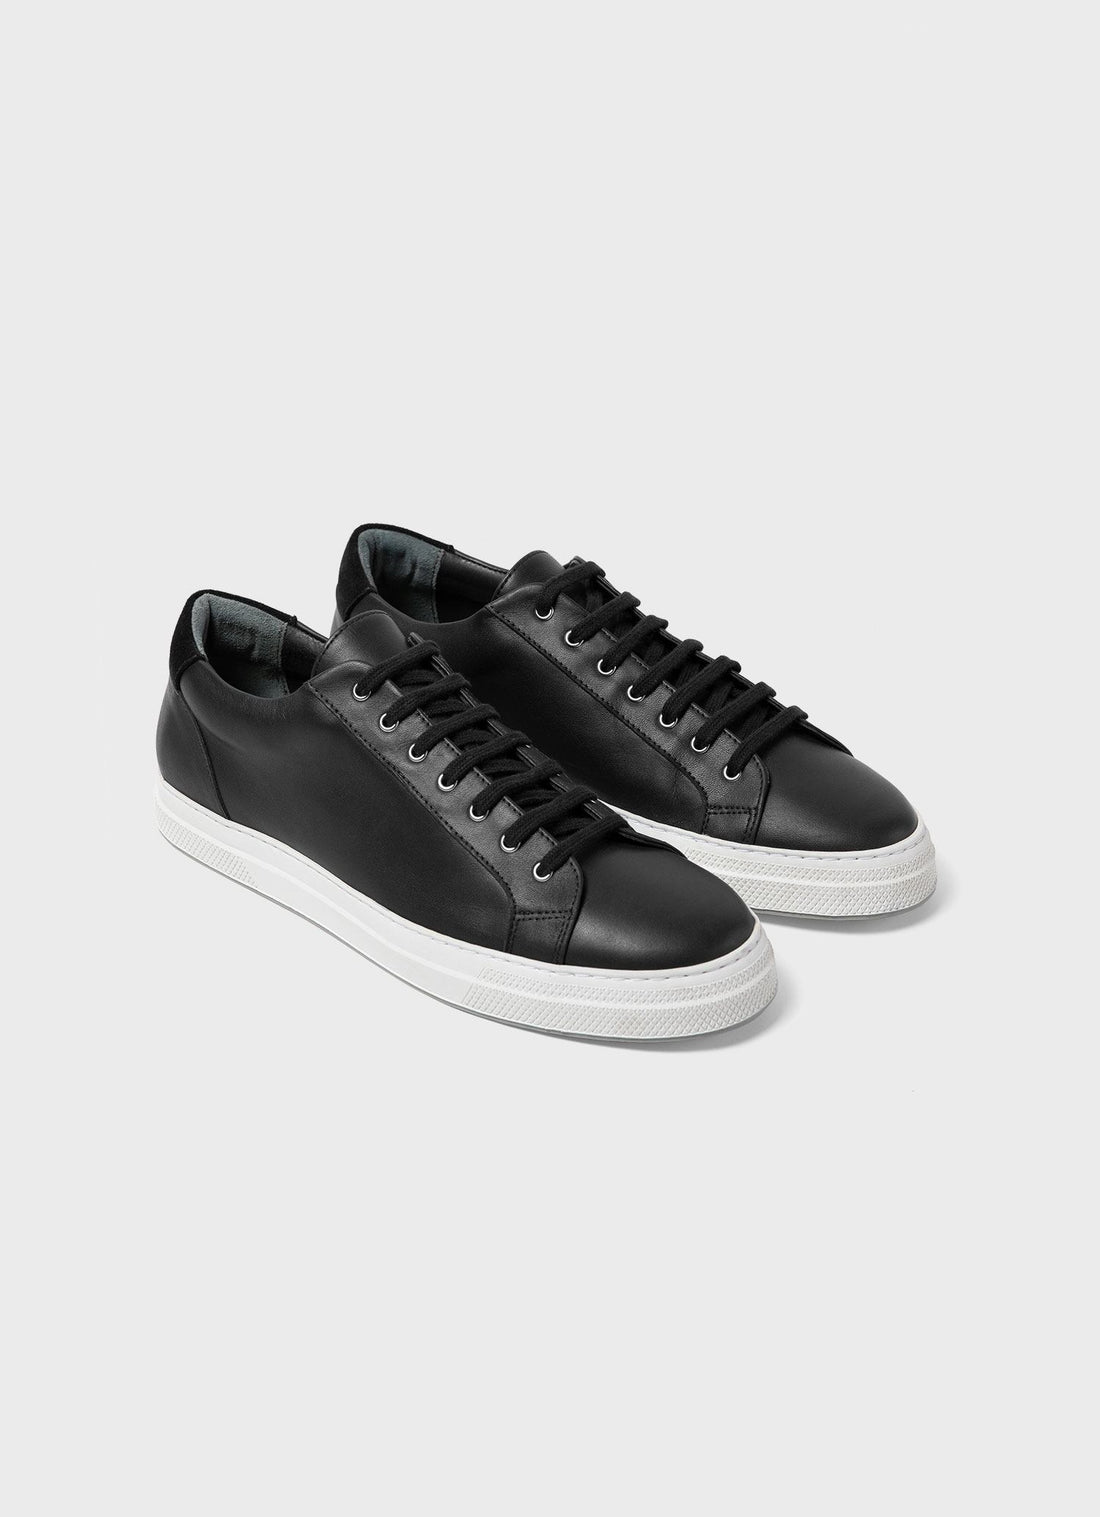 Women's Leather Tennis Shoes in Black